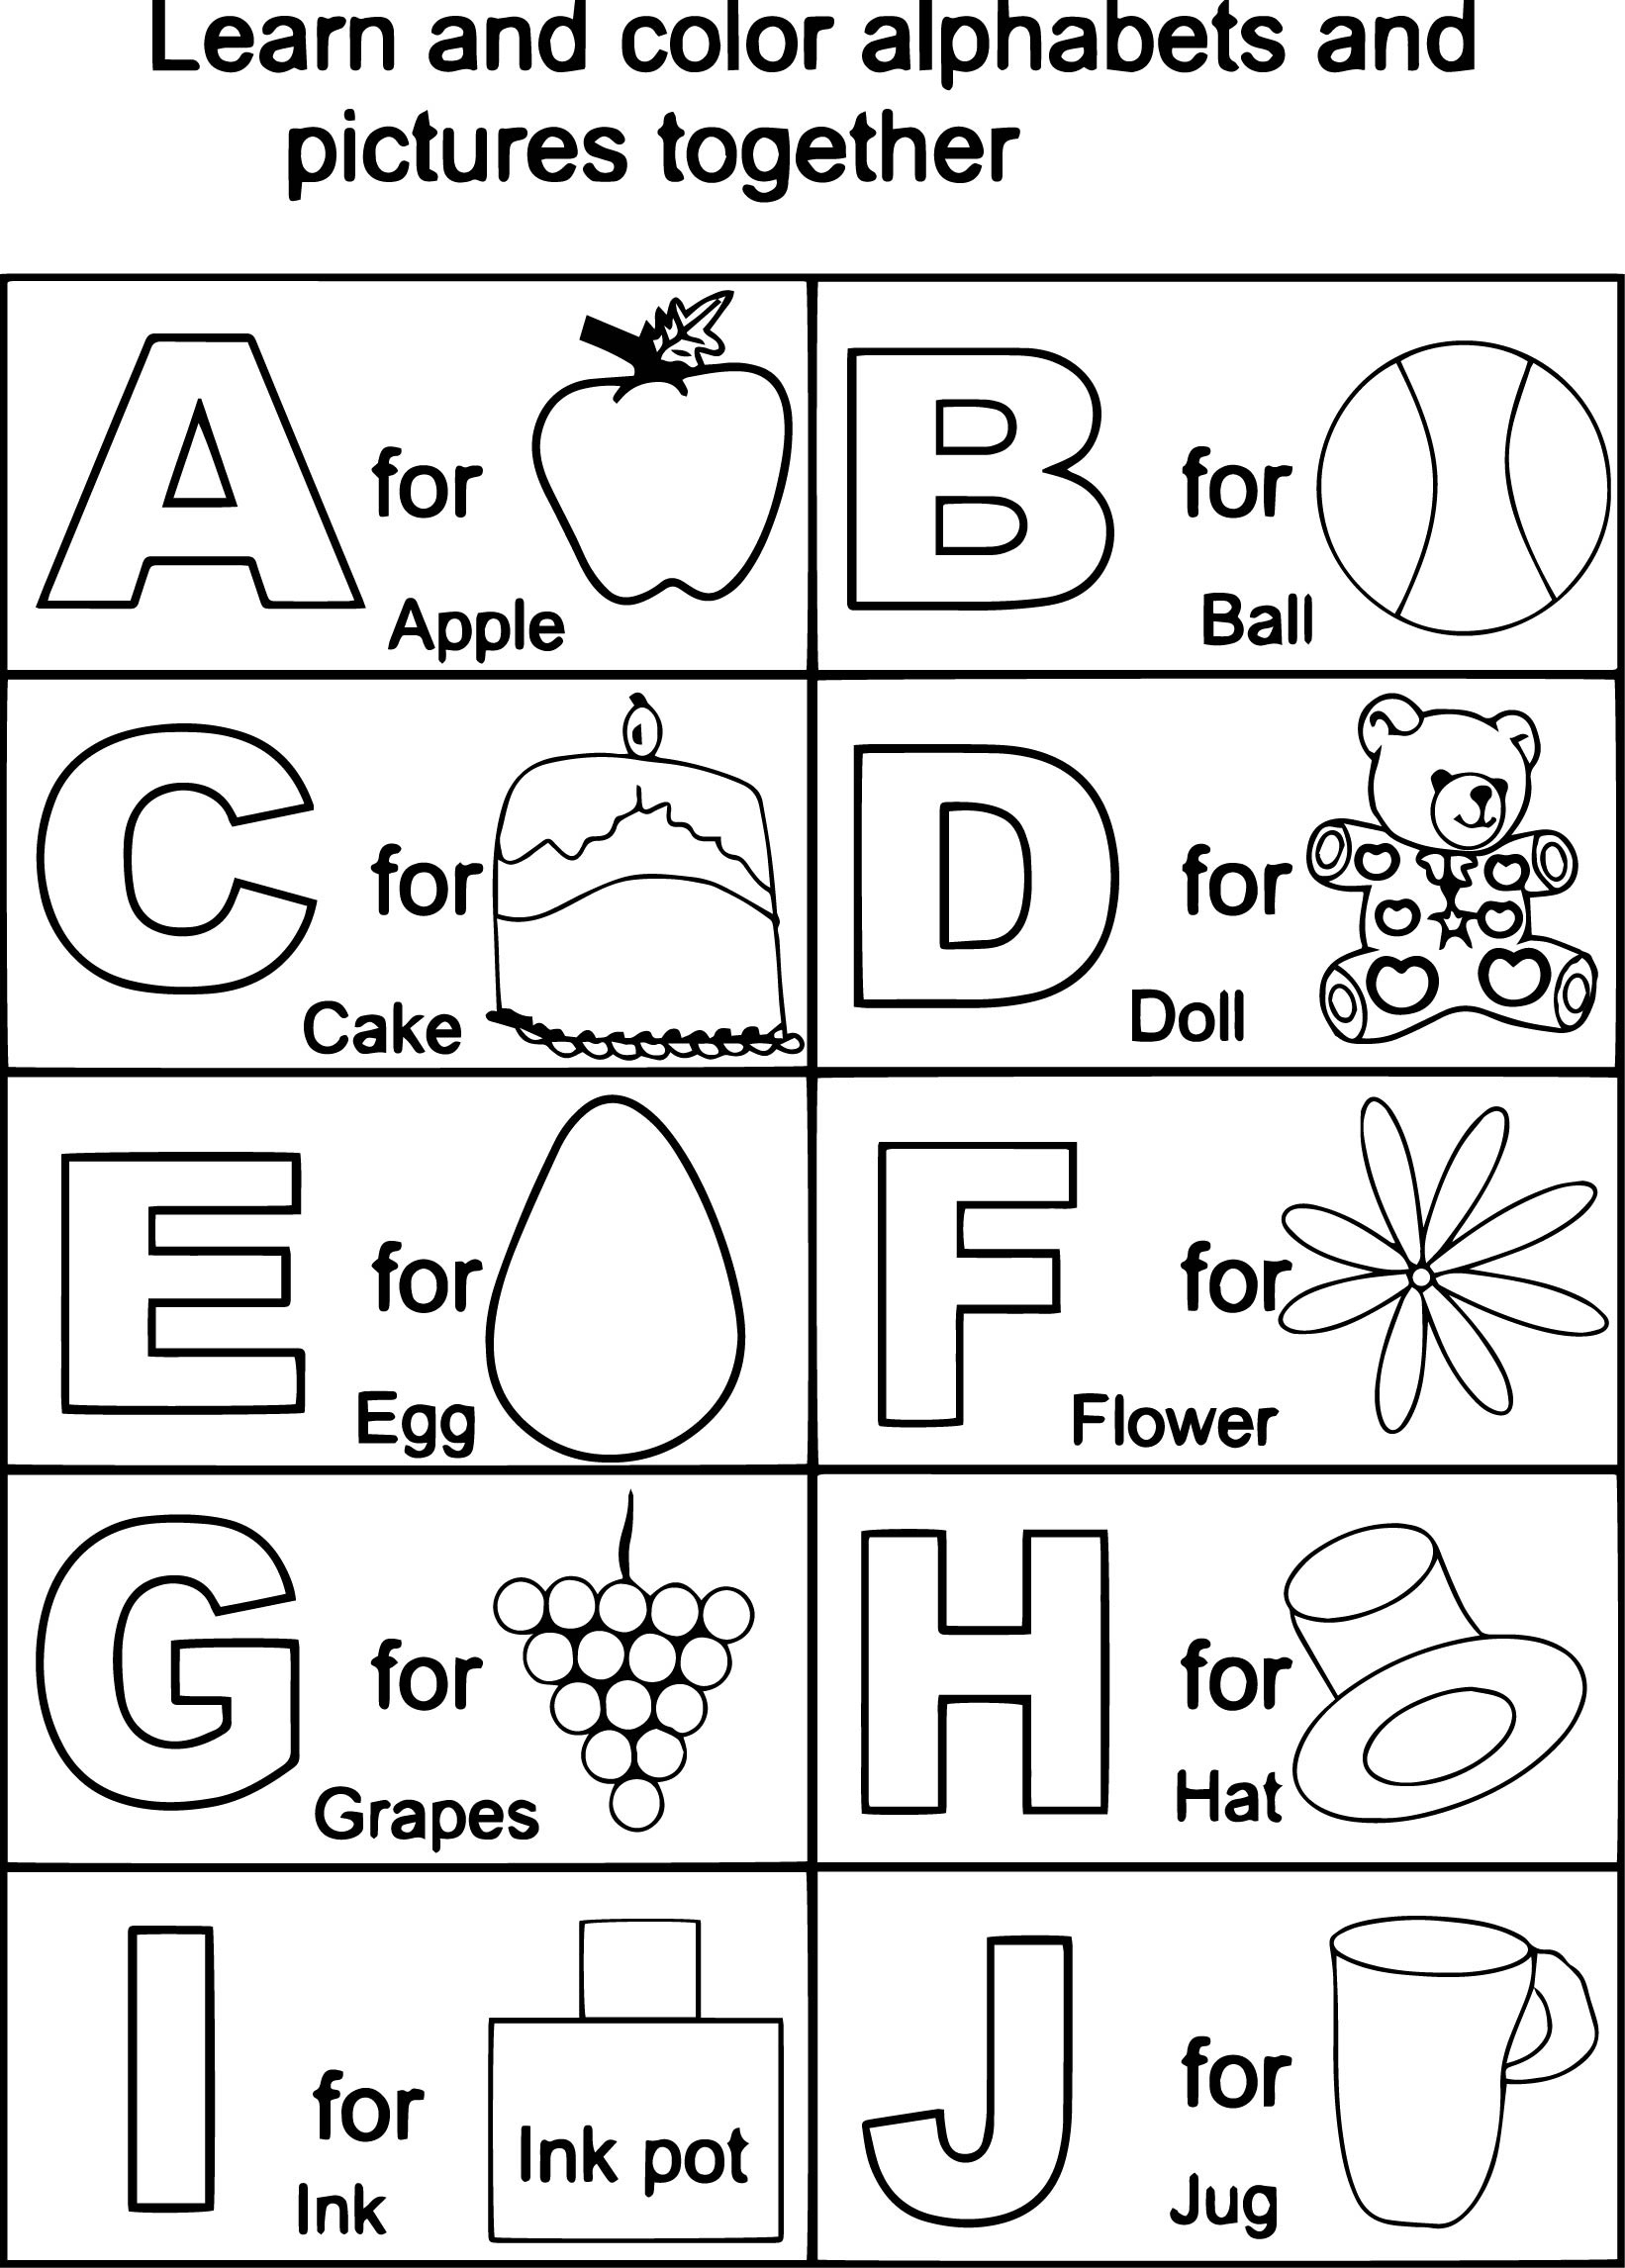 Coloring Pages : Coloring Pages Tremendous Free Printable Alphabet - Free Printable Alphabet Coloring Pages